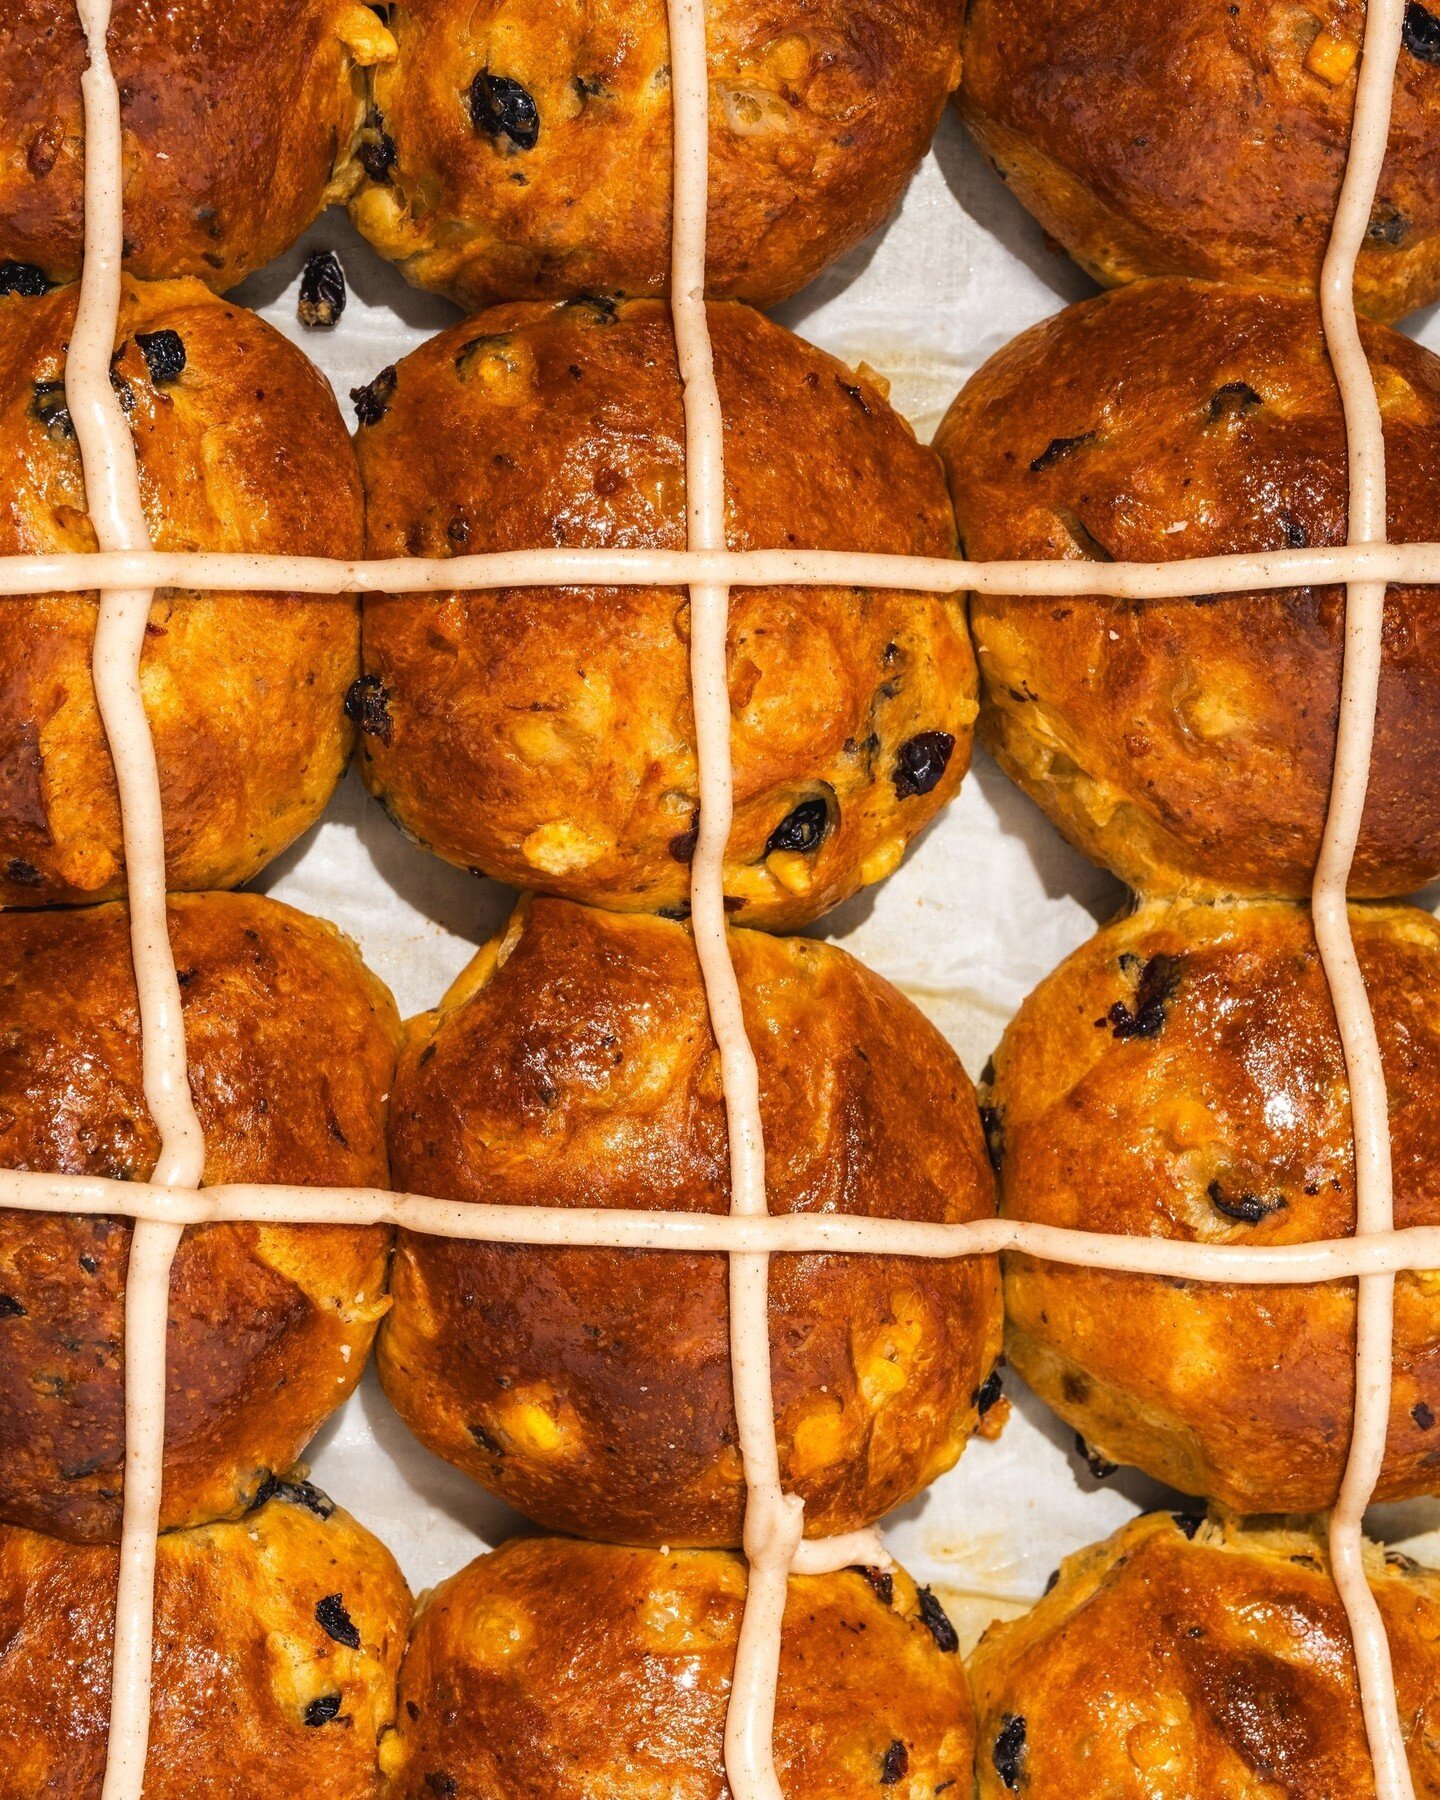 Hot cross buns ~ butter brioche, candied lemon and orange peels, rum-soaked currants, spiced icing.⁠
⁠
#vancouver #yvreats #vancouverfoodie #dishedvan #hotcrossbuns⁠